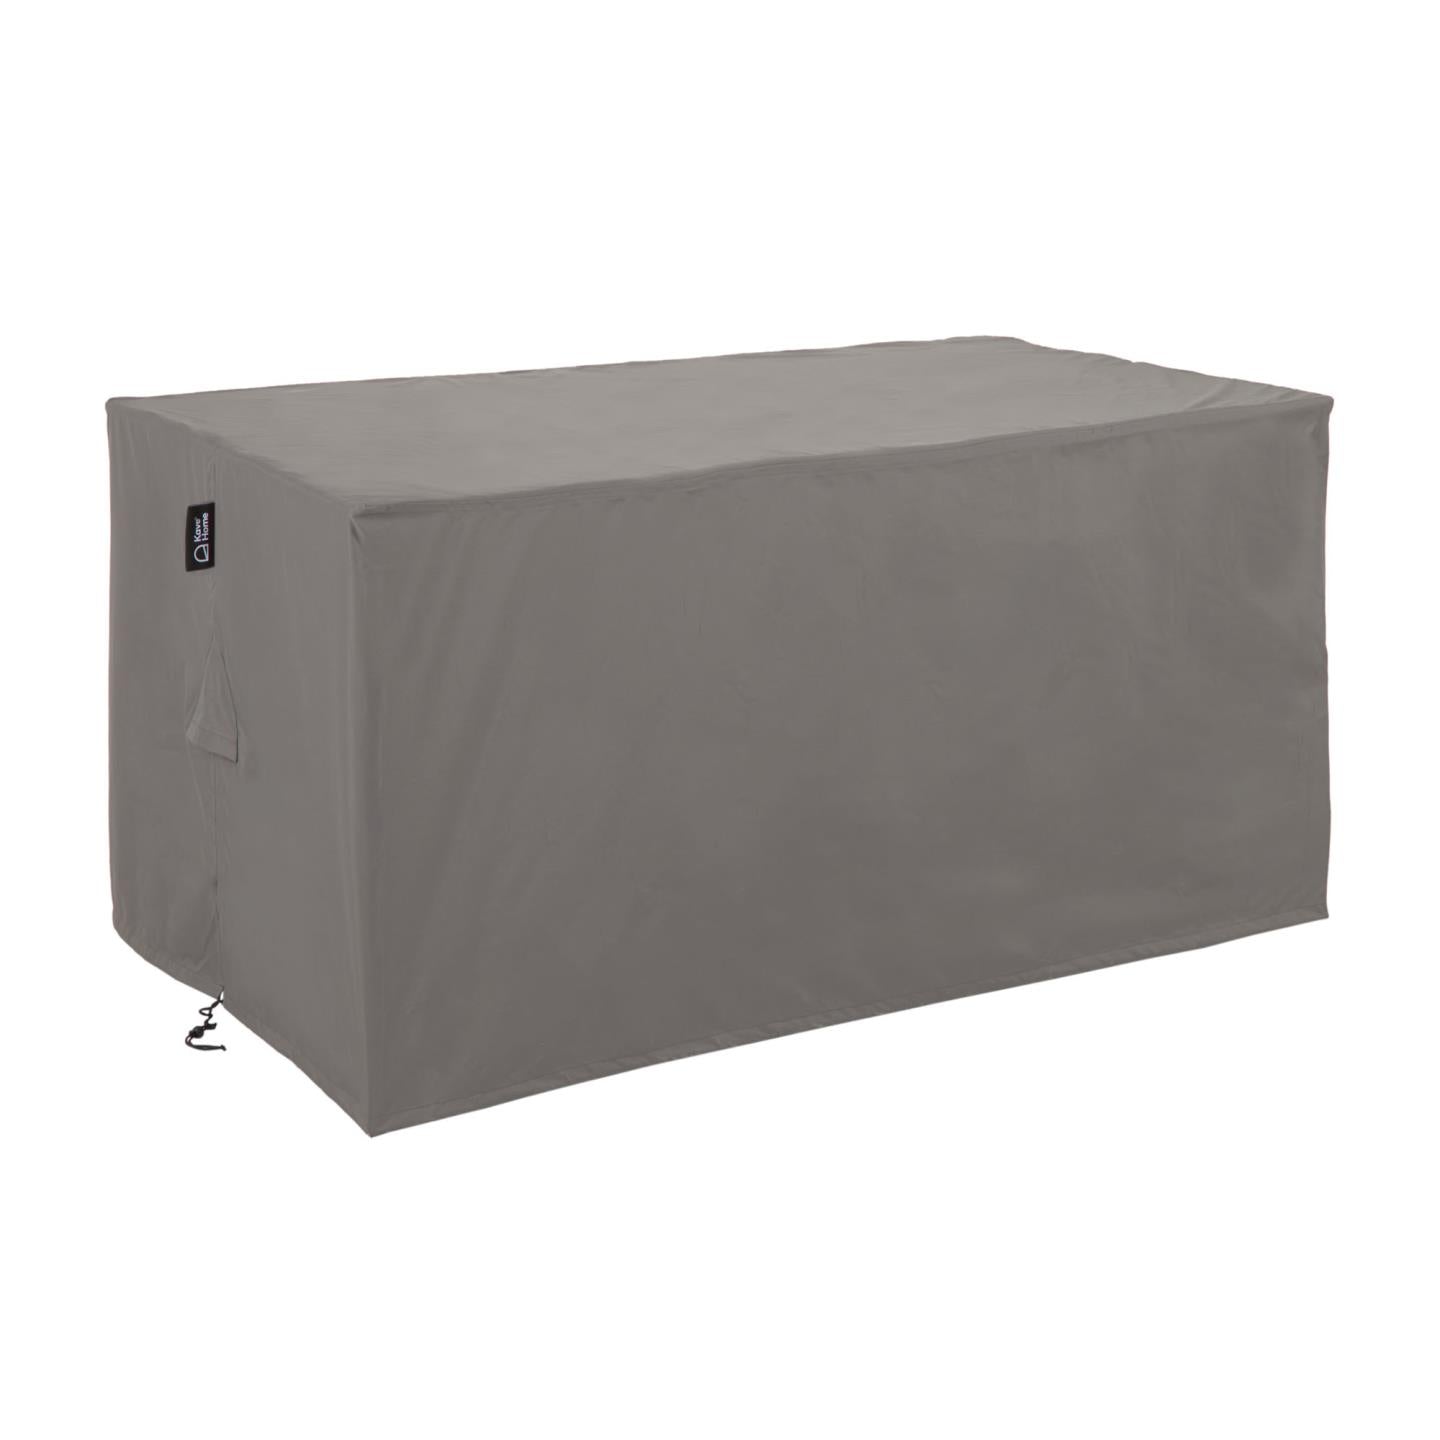 Iria protective cover for small outdoor rectangular tables max. 170 x 110 cm